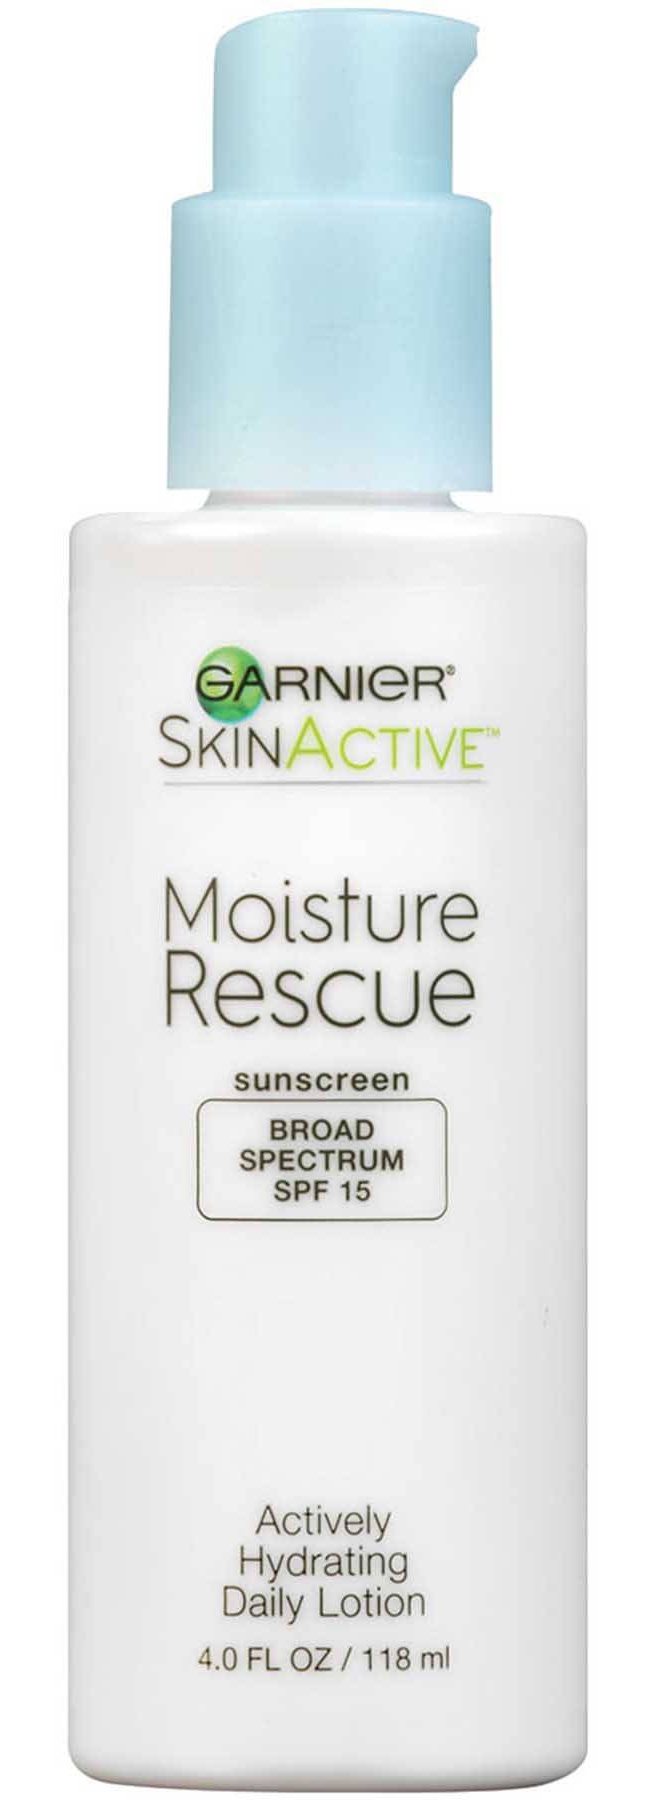 Garnier Skin Active Moisture Rescue Actively Hydrating Daily Lotion Spf 15